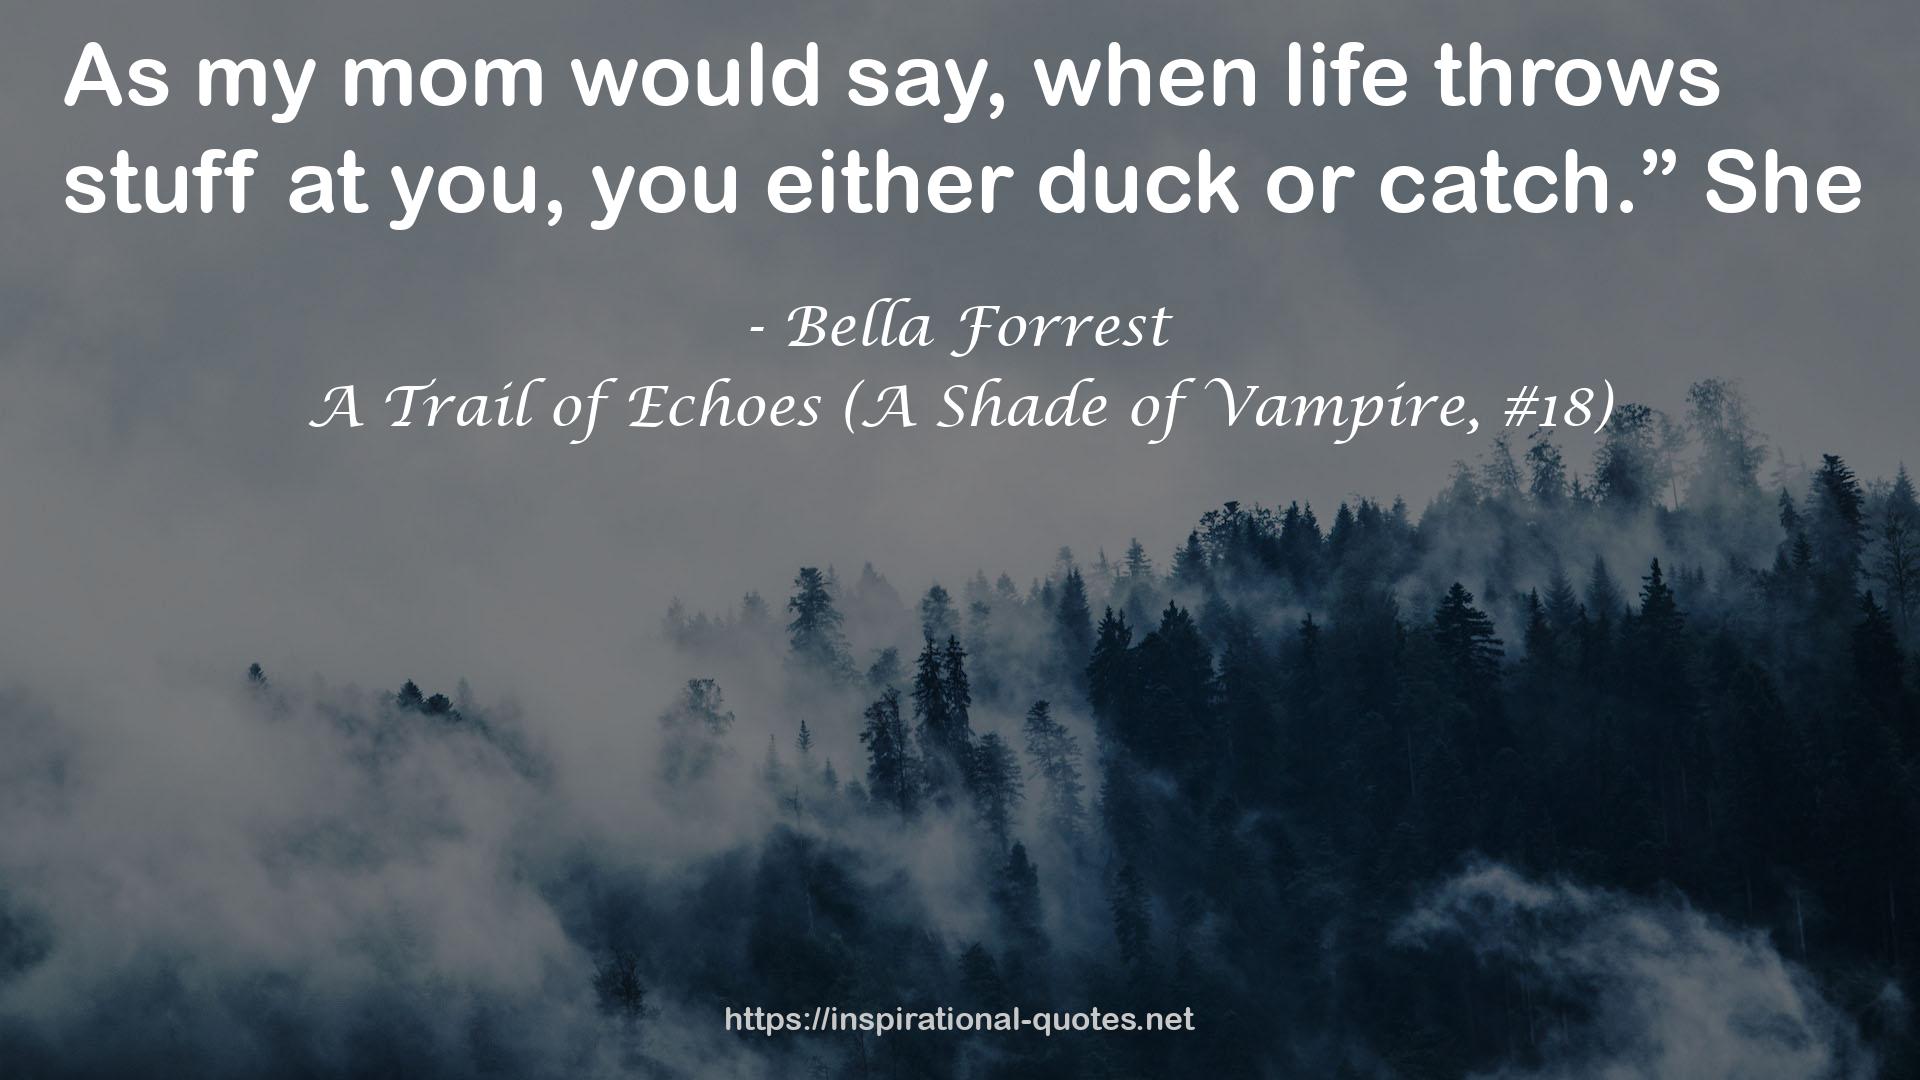 A Trail of Echoes (A Shade of Vampire, #18) QUOTES